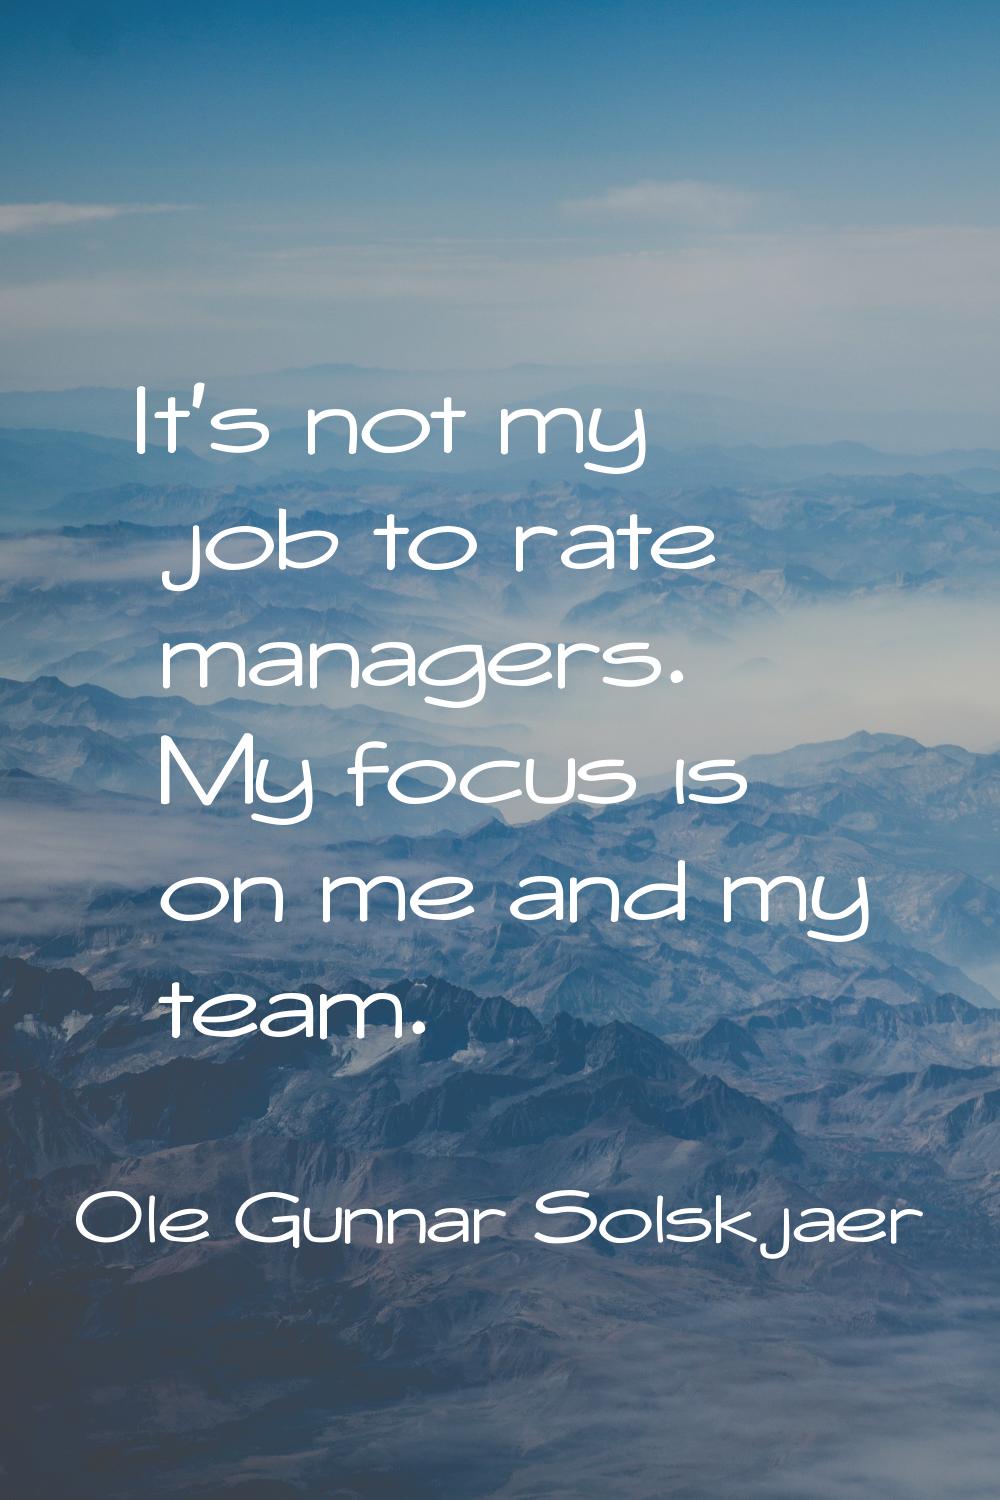 It's not my job to rate managers. My focus is on me and my team.